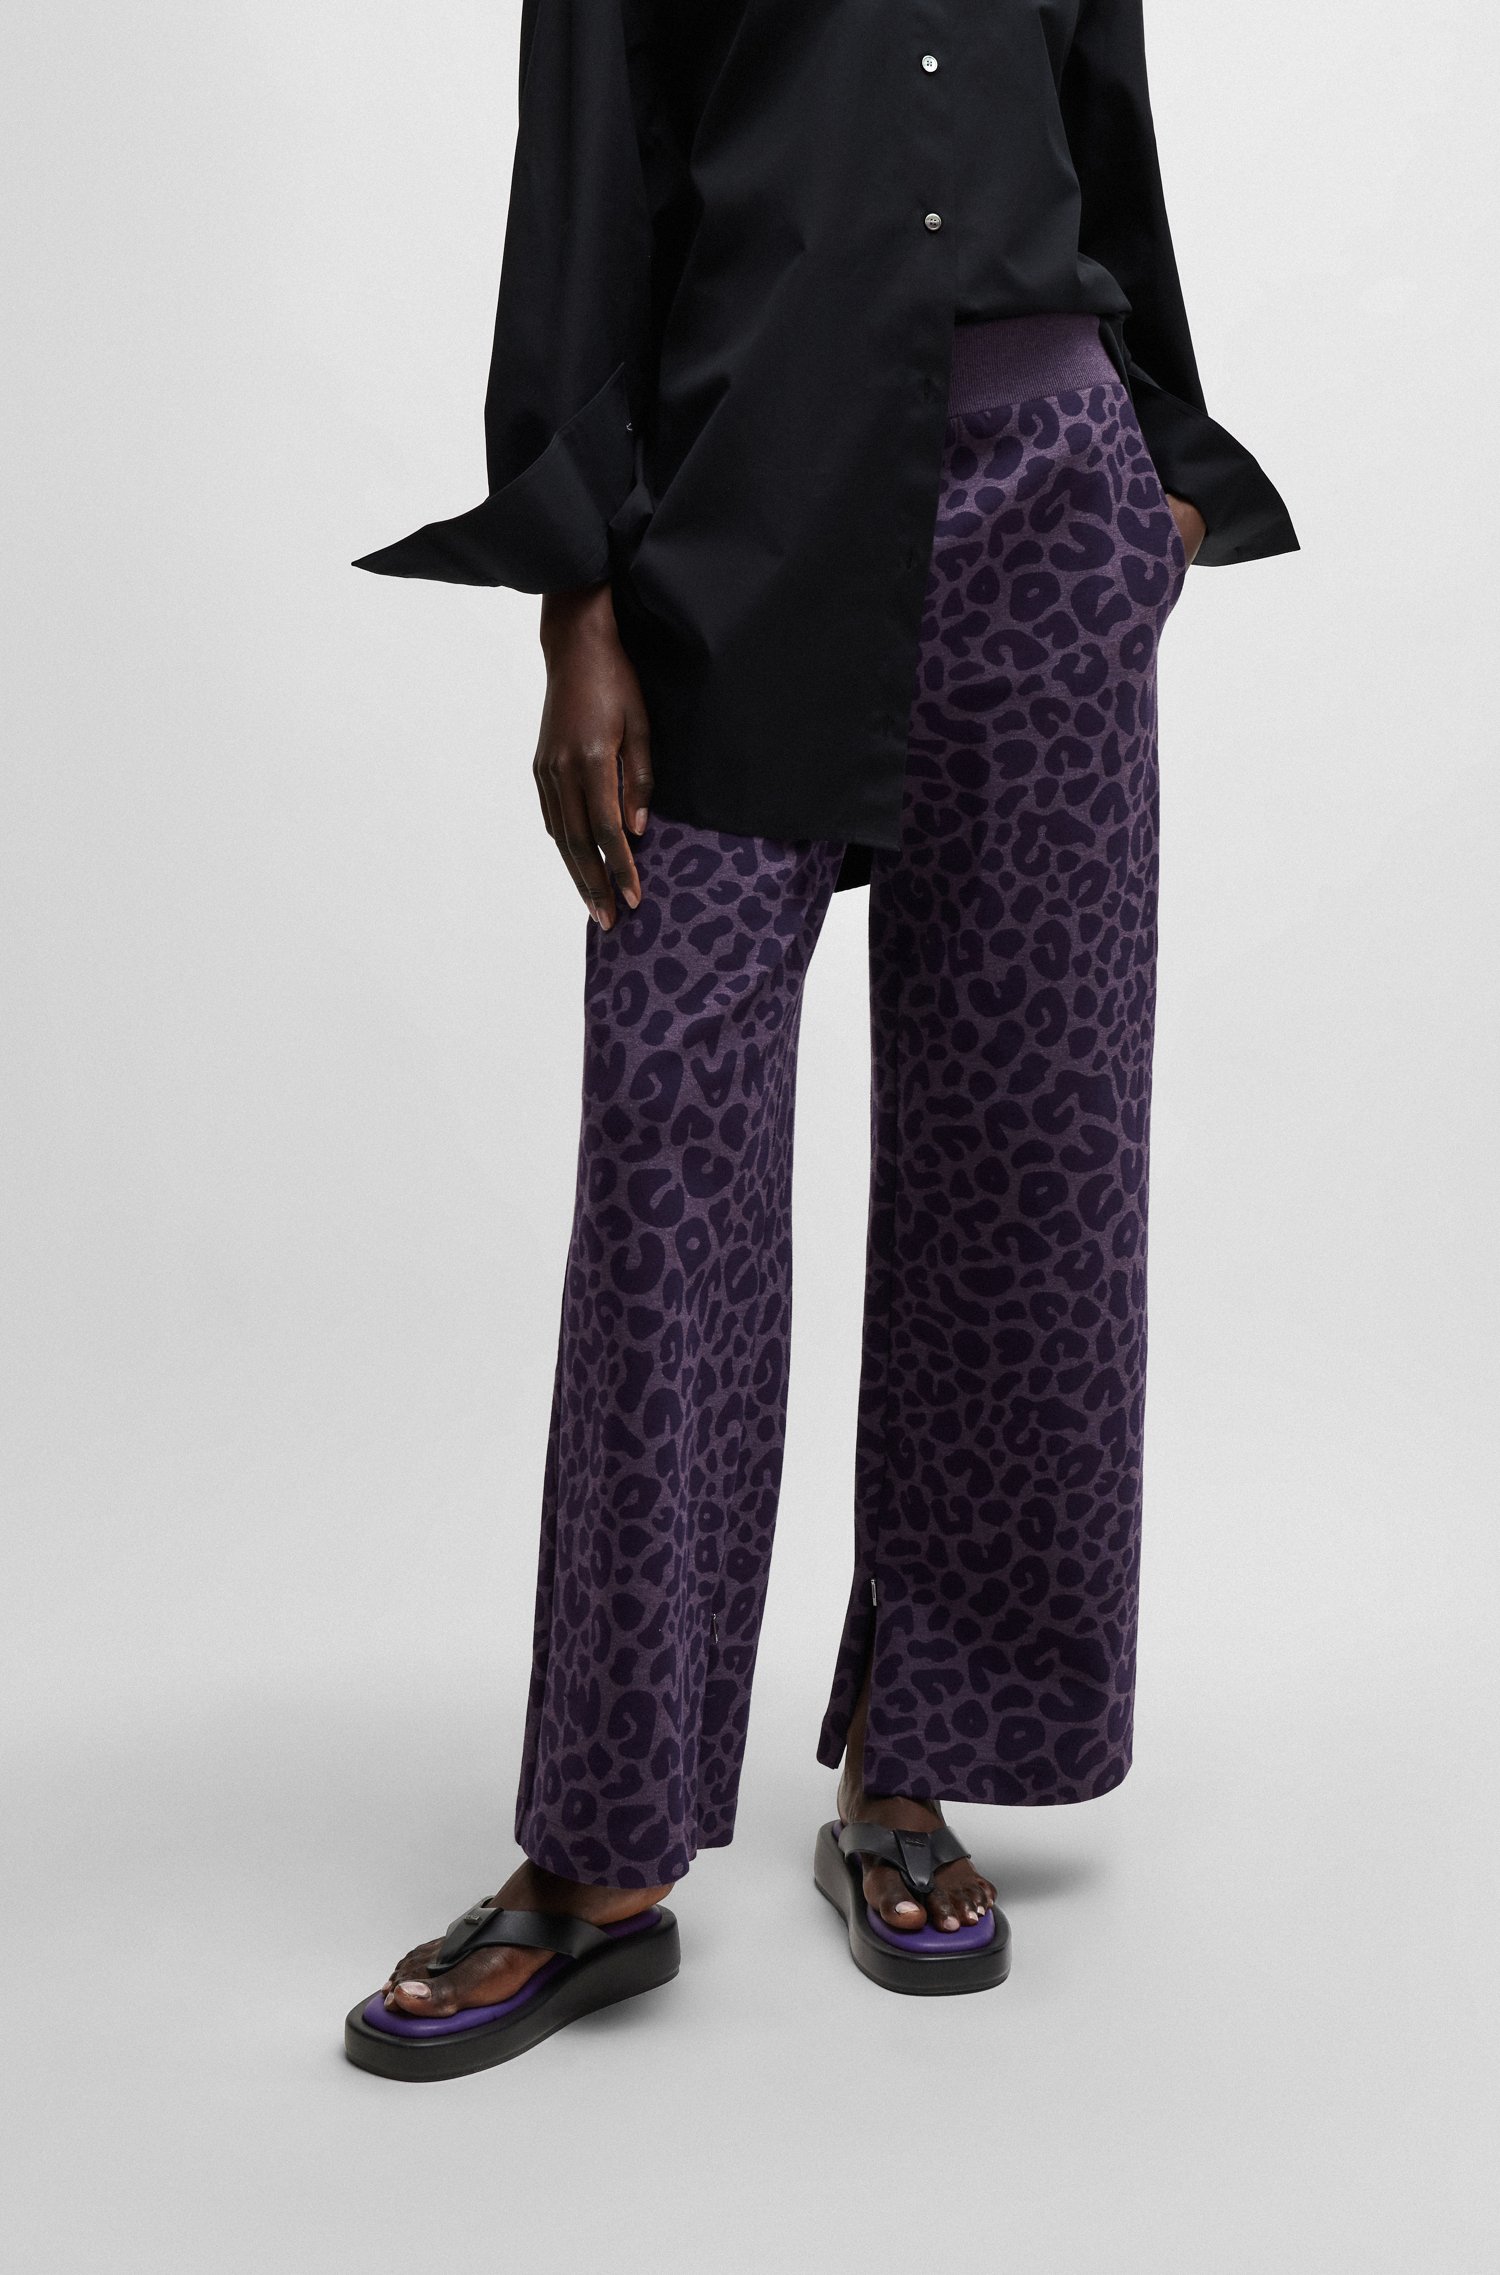 NAOMI x BOSS tracksuit bottoms with leopard print